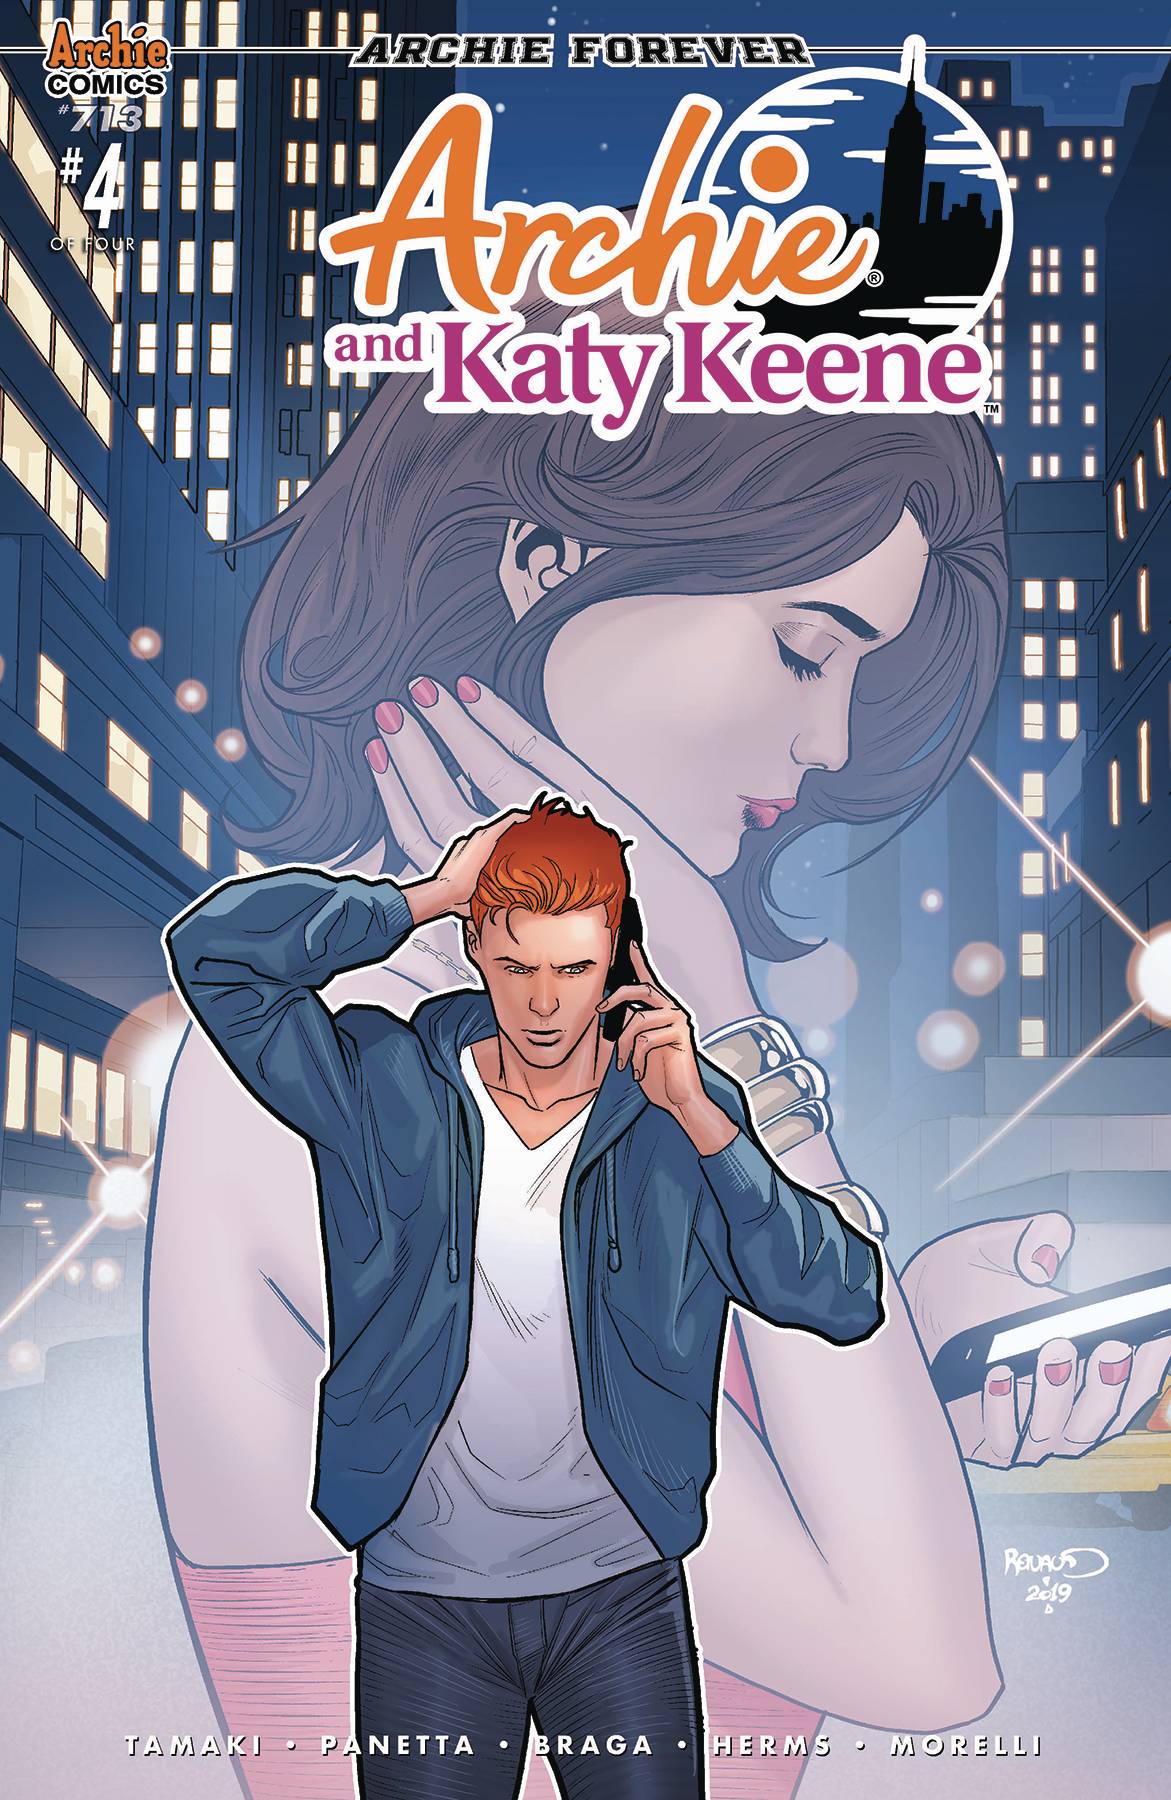 Archie #713 (Archie & Katy Keene Part 4) Cover C Renaud